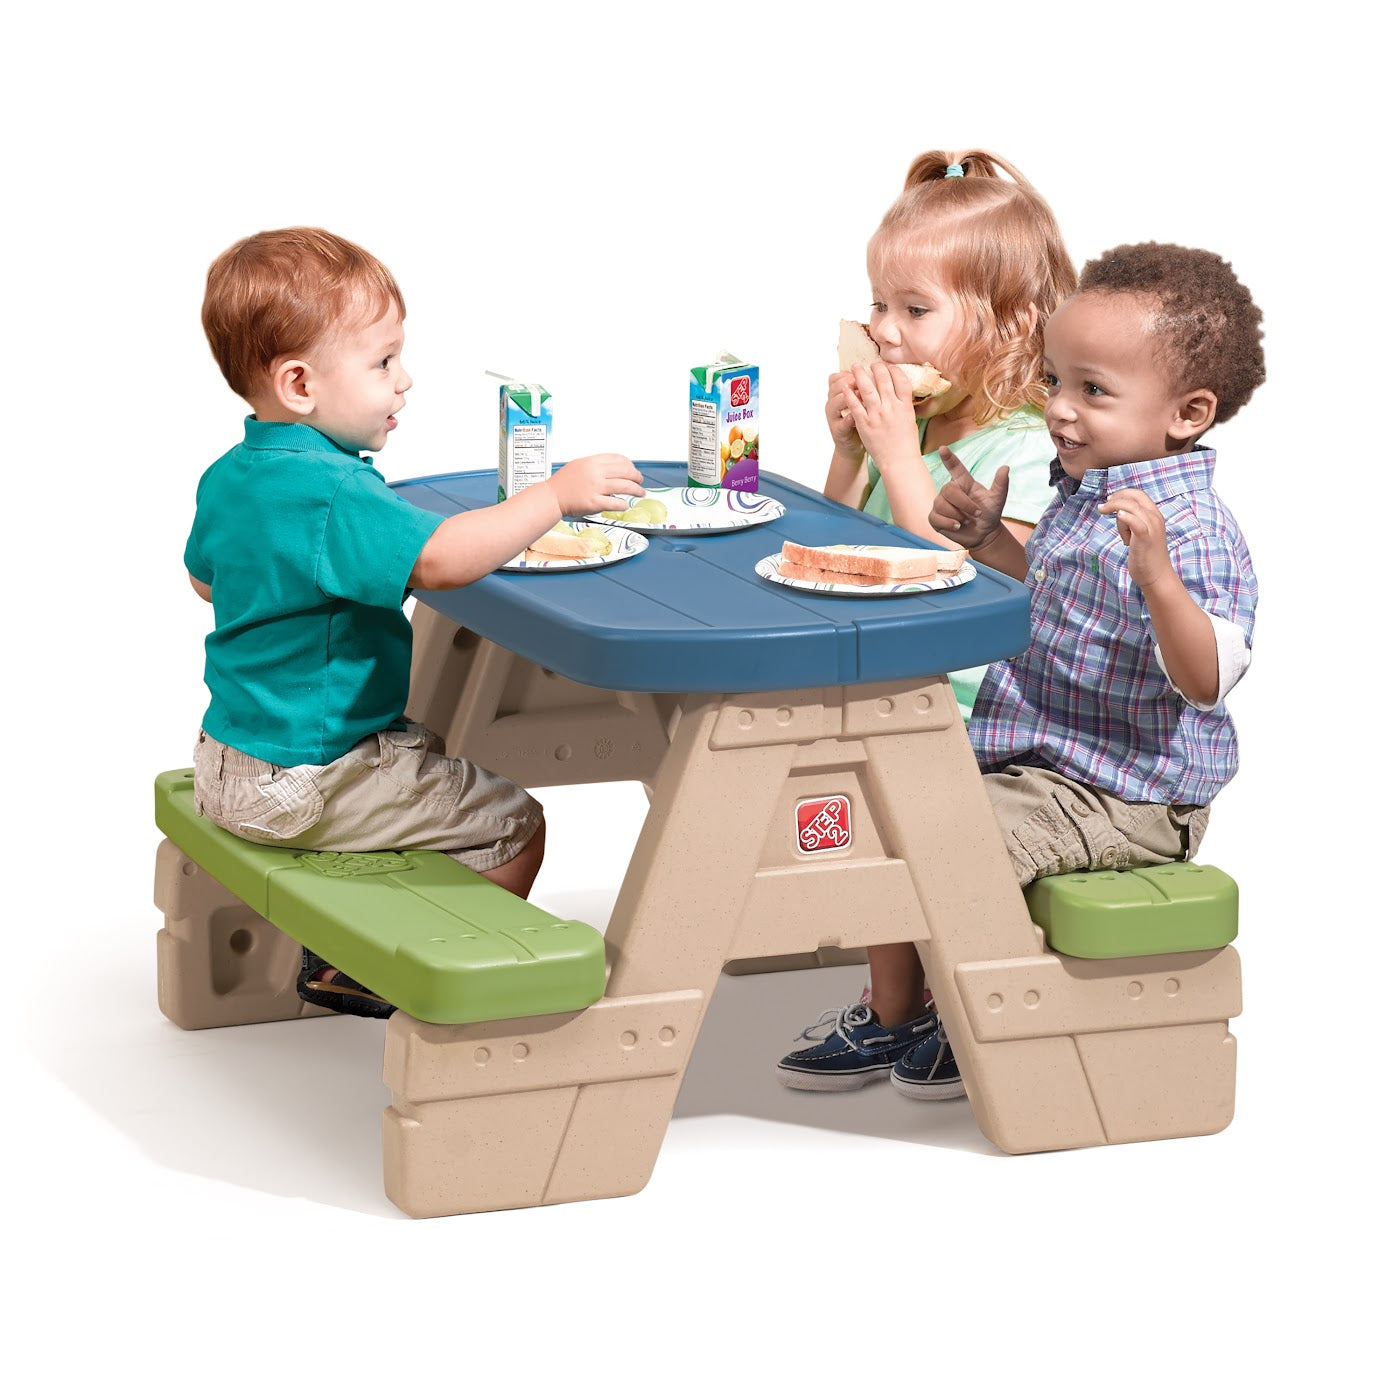 Step2 Sit & Play Picnic Table With Umbrella